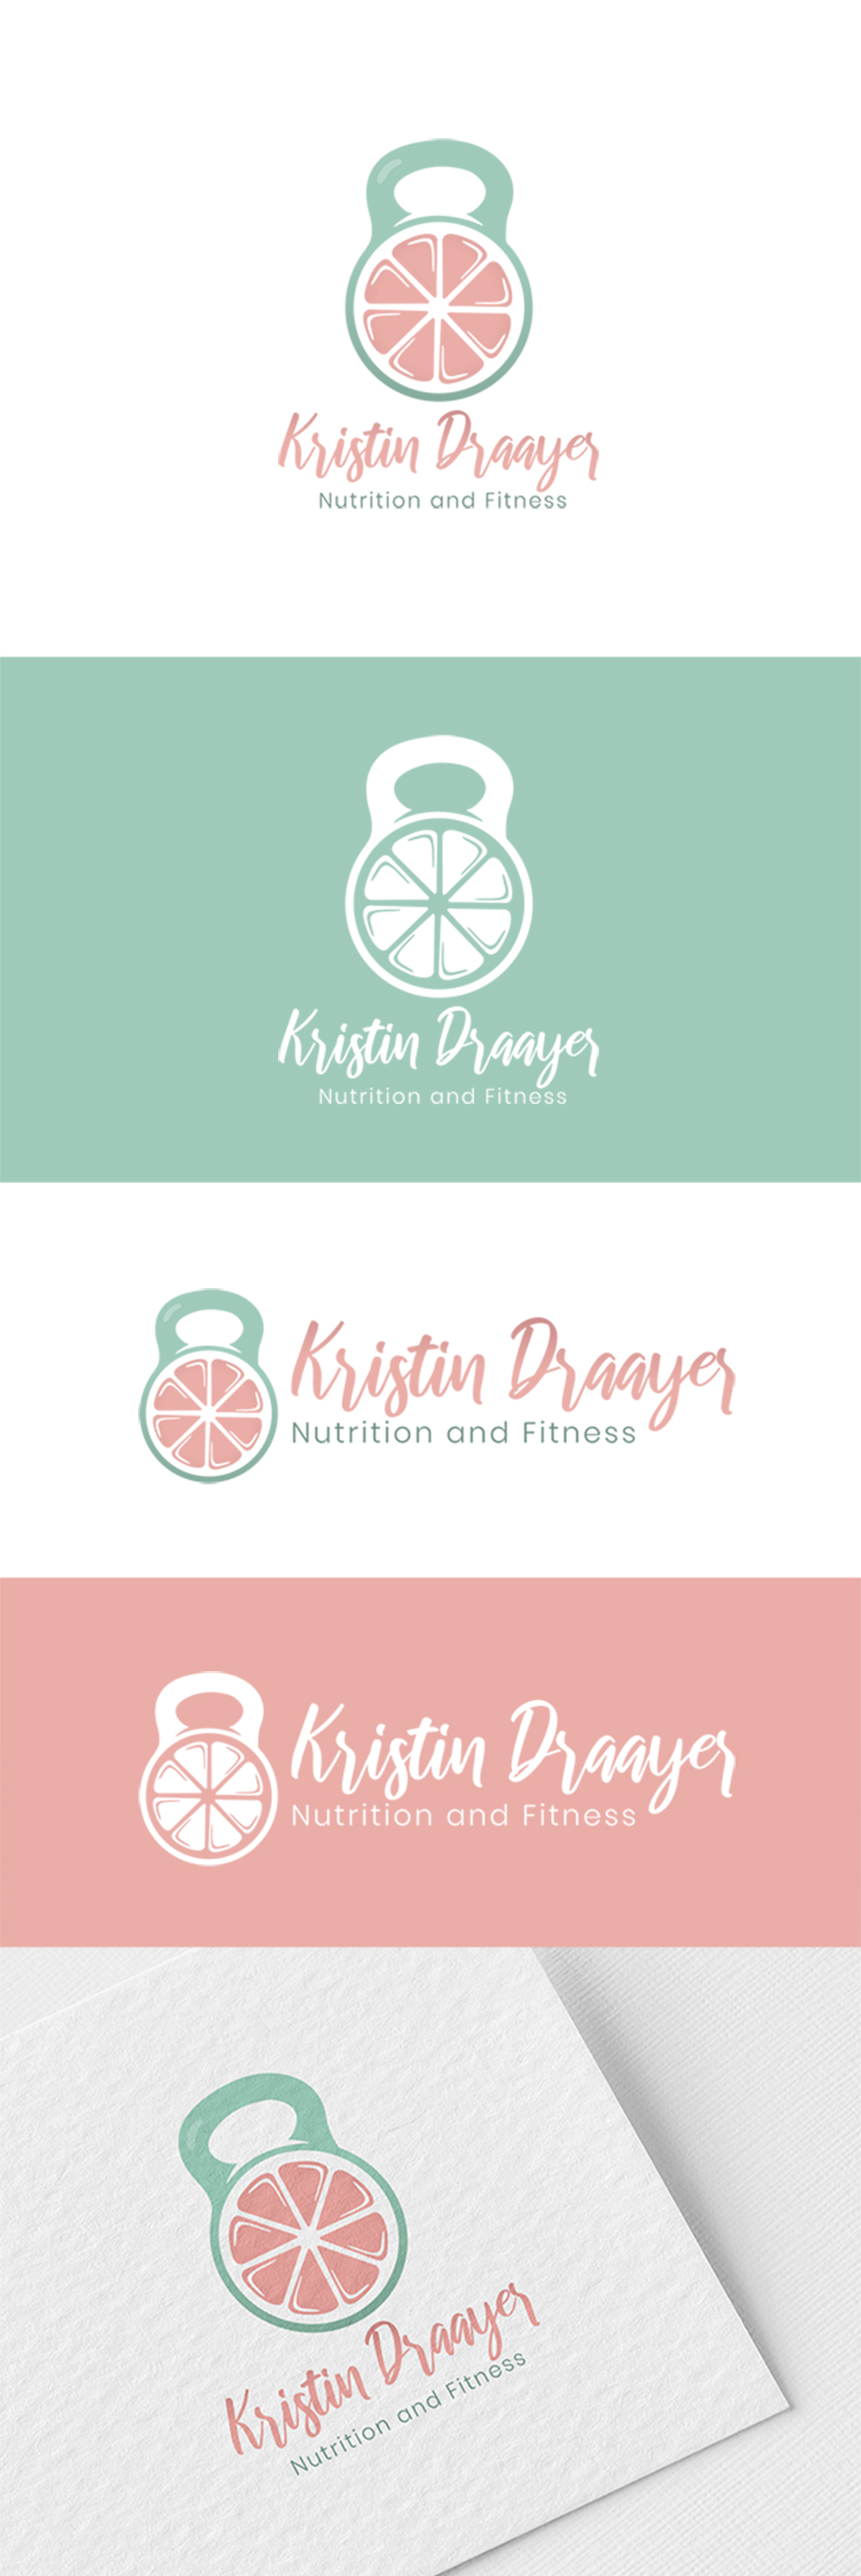 Check out kedraayer's new logo design from 99designs - Check out kedraayer's new logo design from 99designs -   12 kid fitness Logo ideas